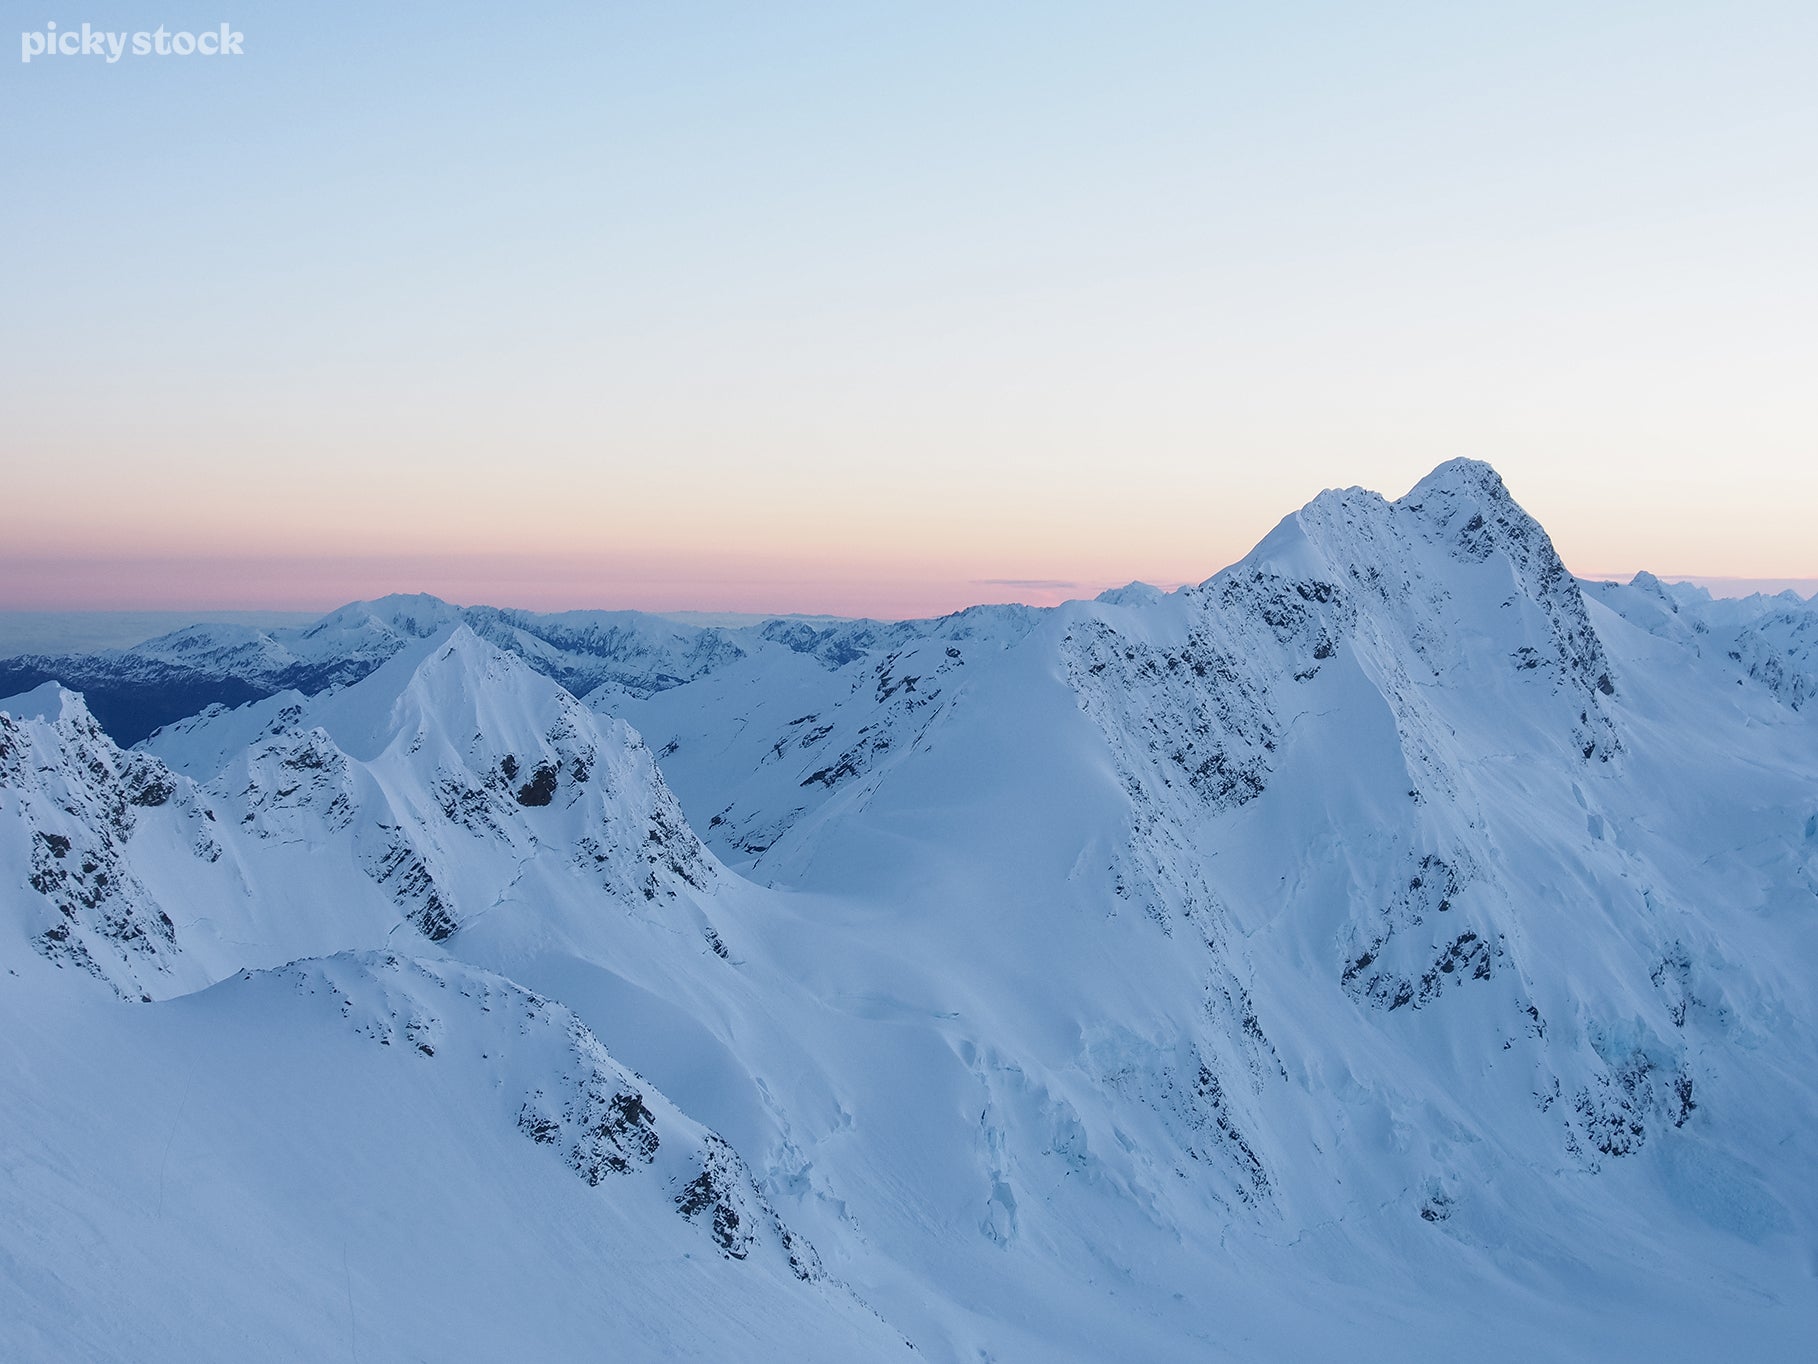 Landscape of a white snowy mountain range in a cool blue light with a soft red sky hanging far in the backgorund.